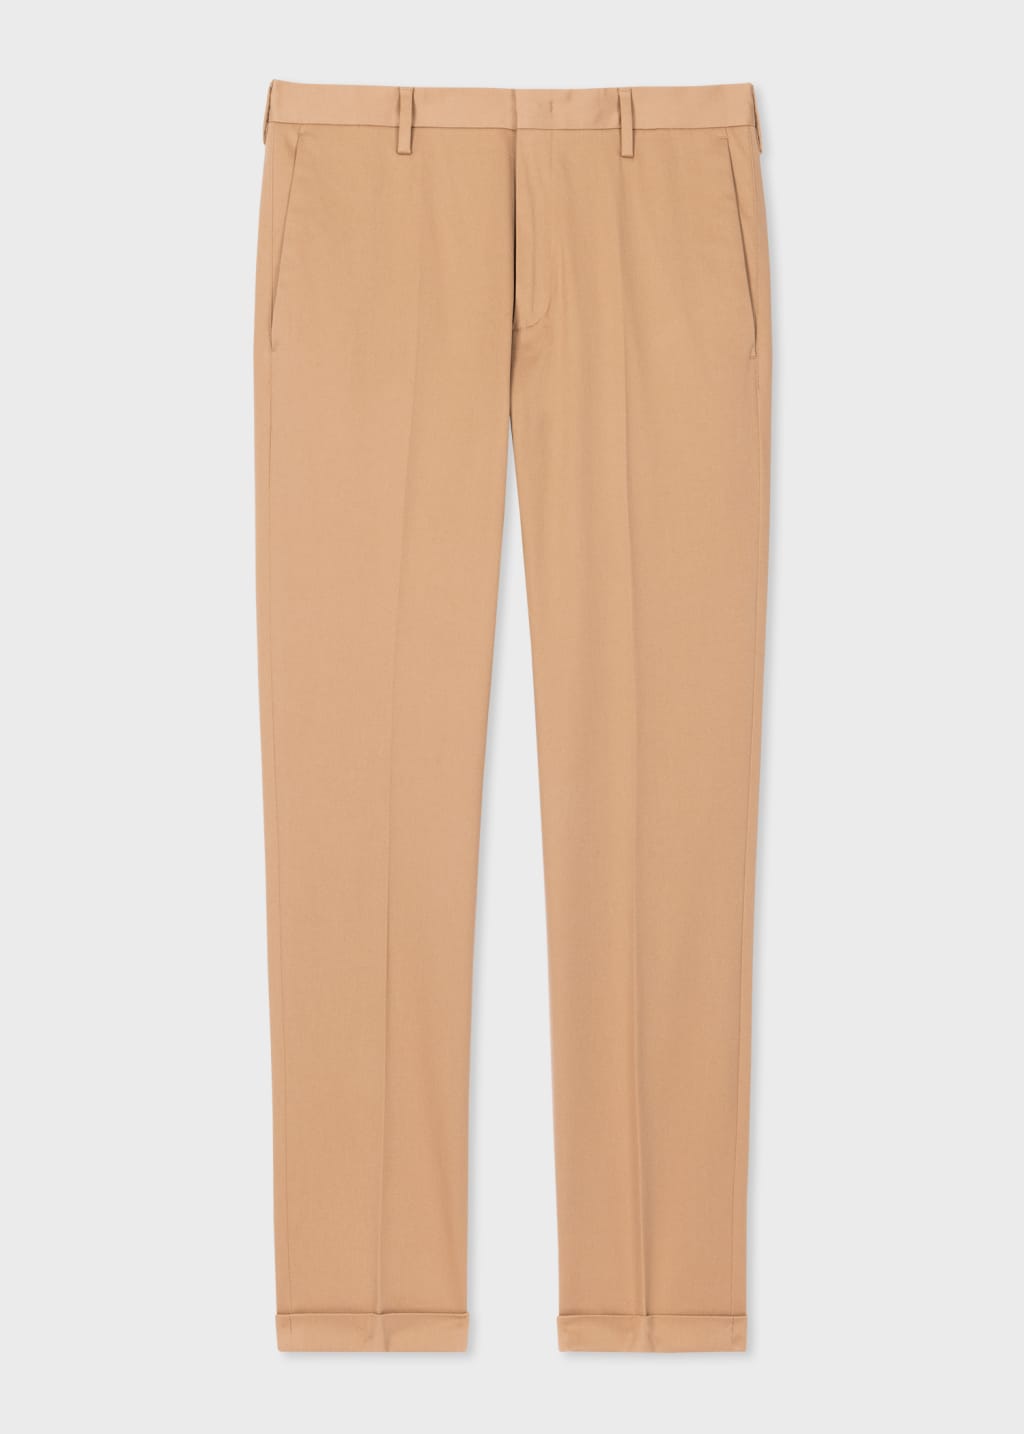 Product View - Slim-Fit Tan Cotton-Stretch Chinos by Paul Smith